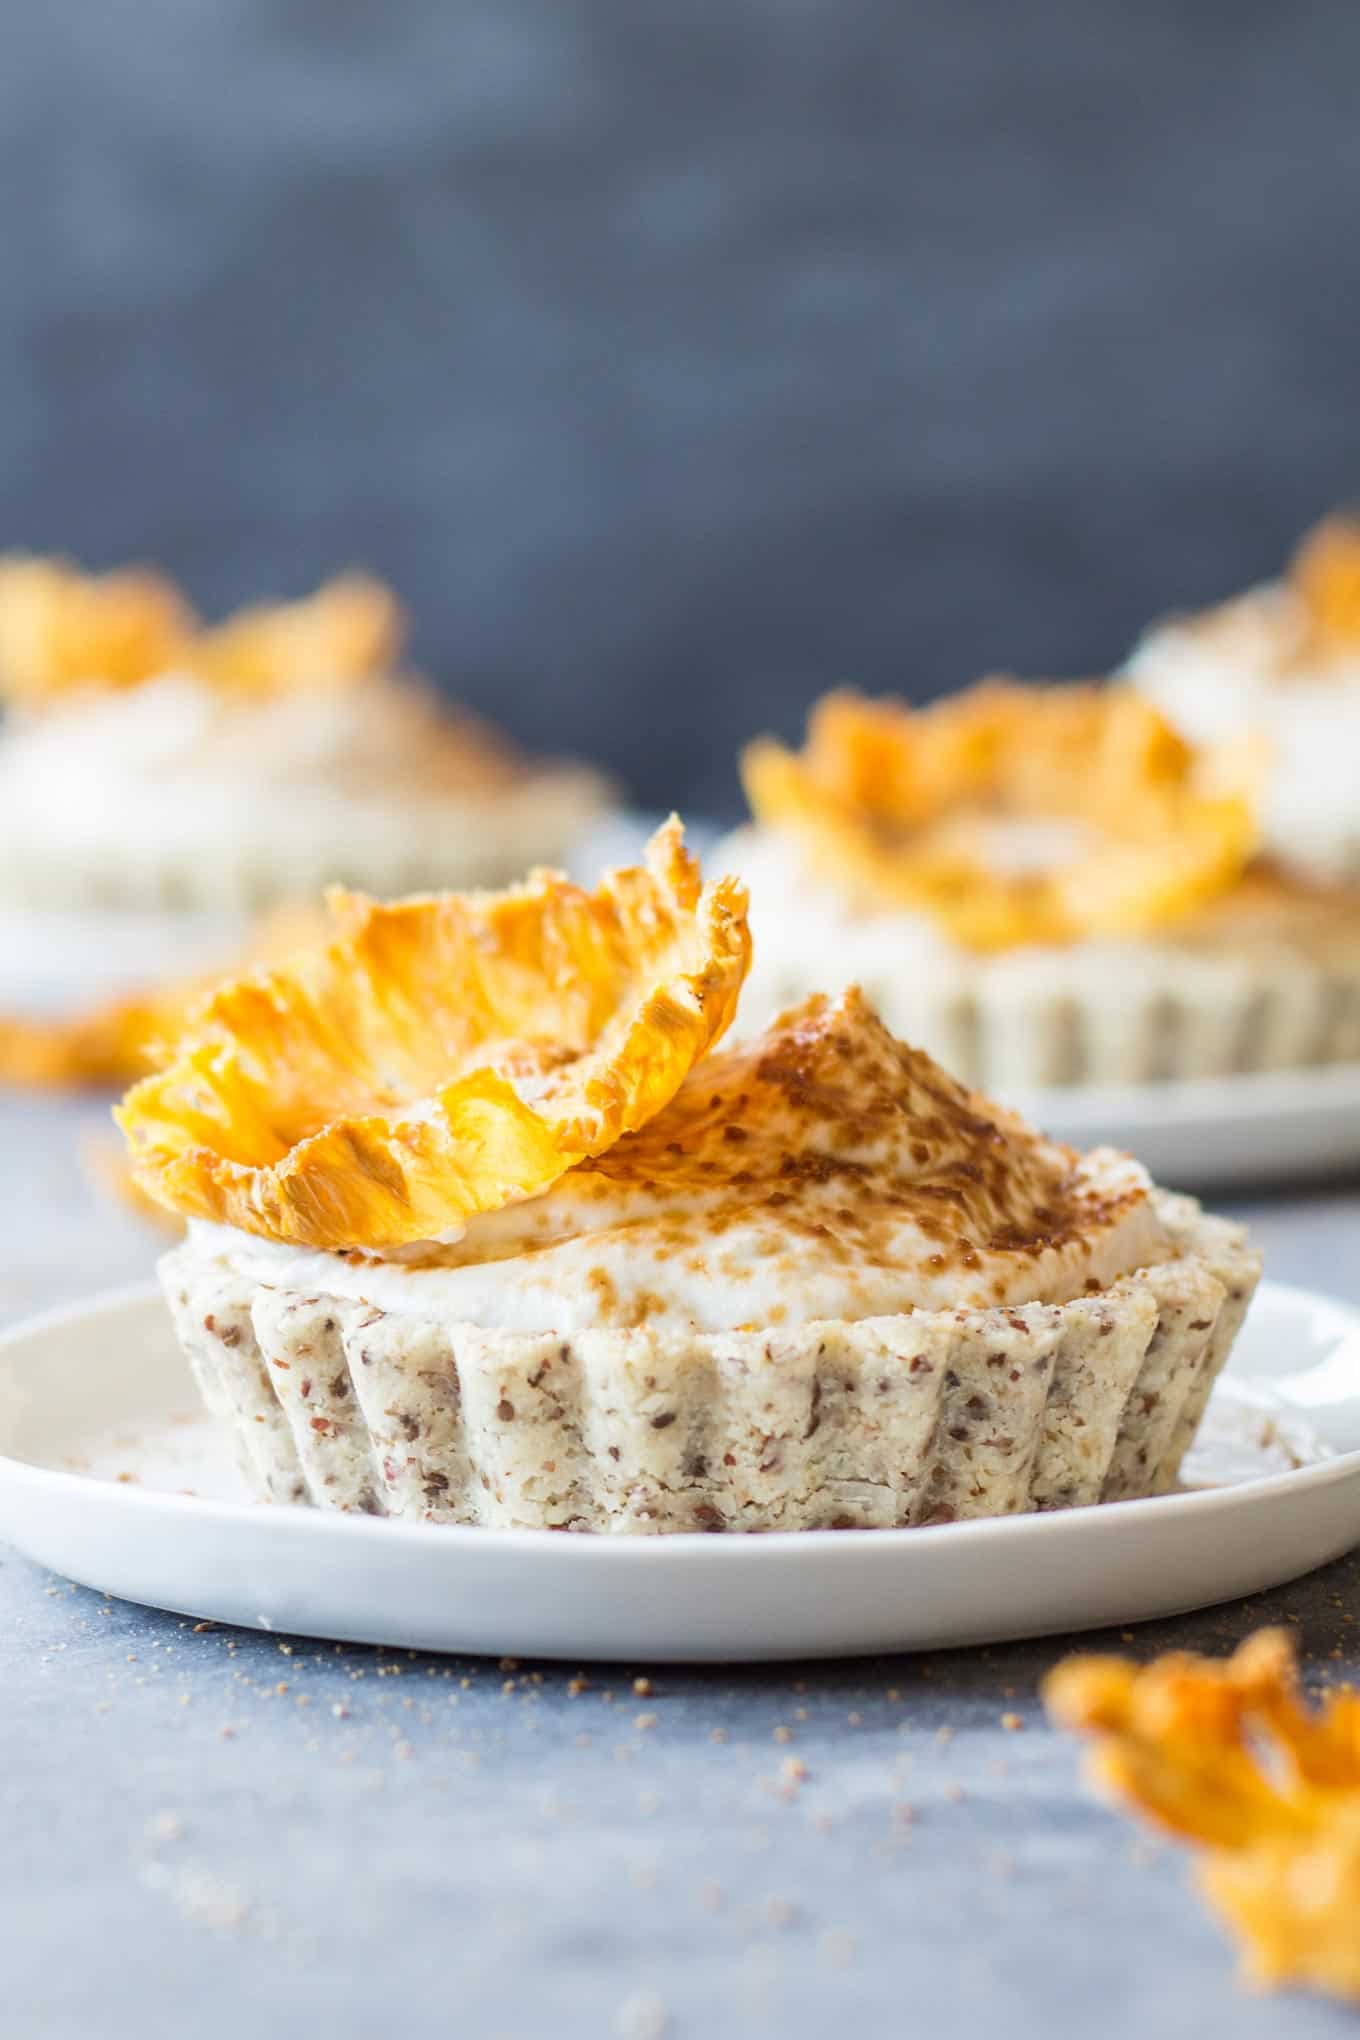 Pineapple coconut tartlets recipe! Green Healthy Cooking's beautiful and elegant recipe for dairy free pineapple coconut tartlets topped with edible pineapple "flowers." An amazing dessert!